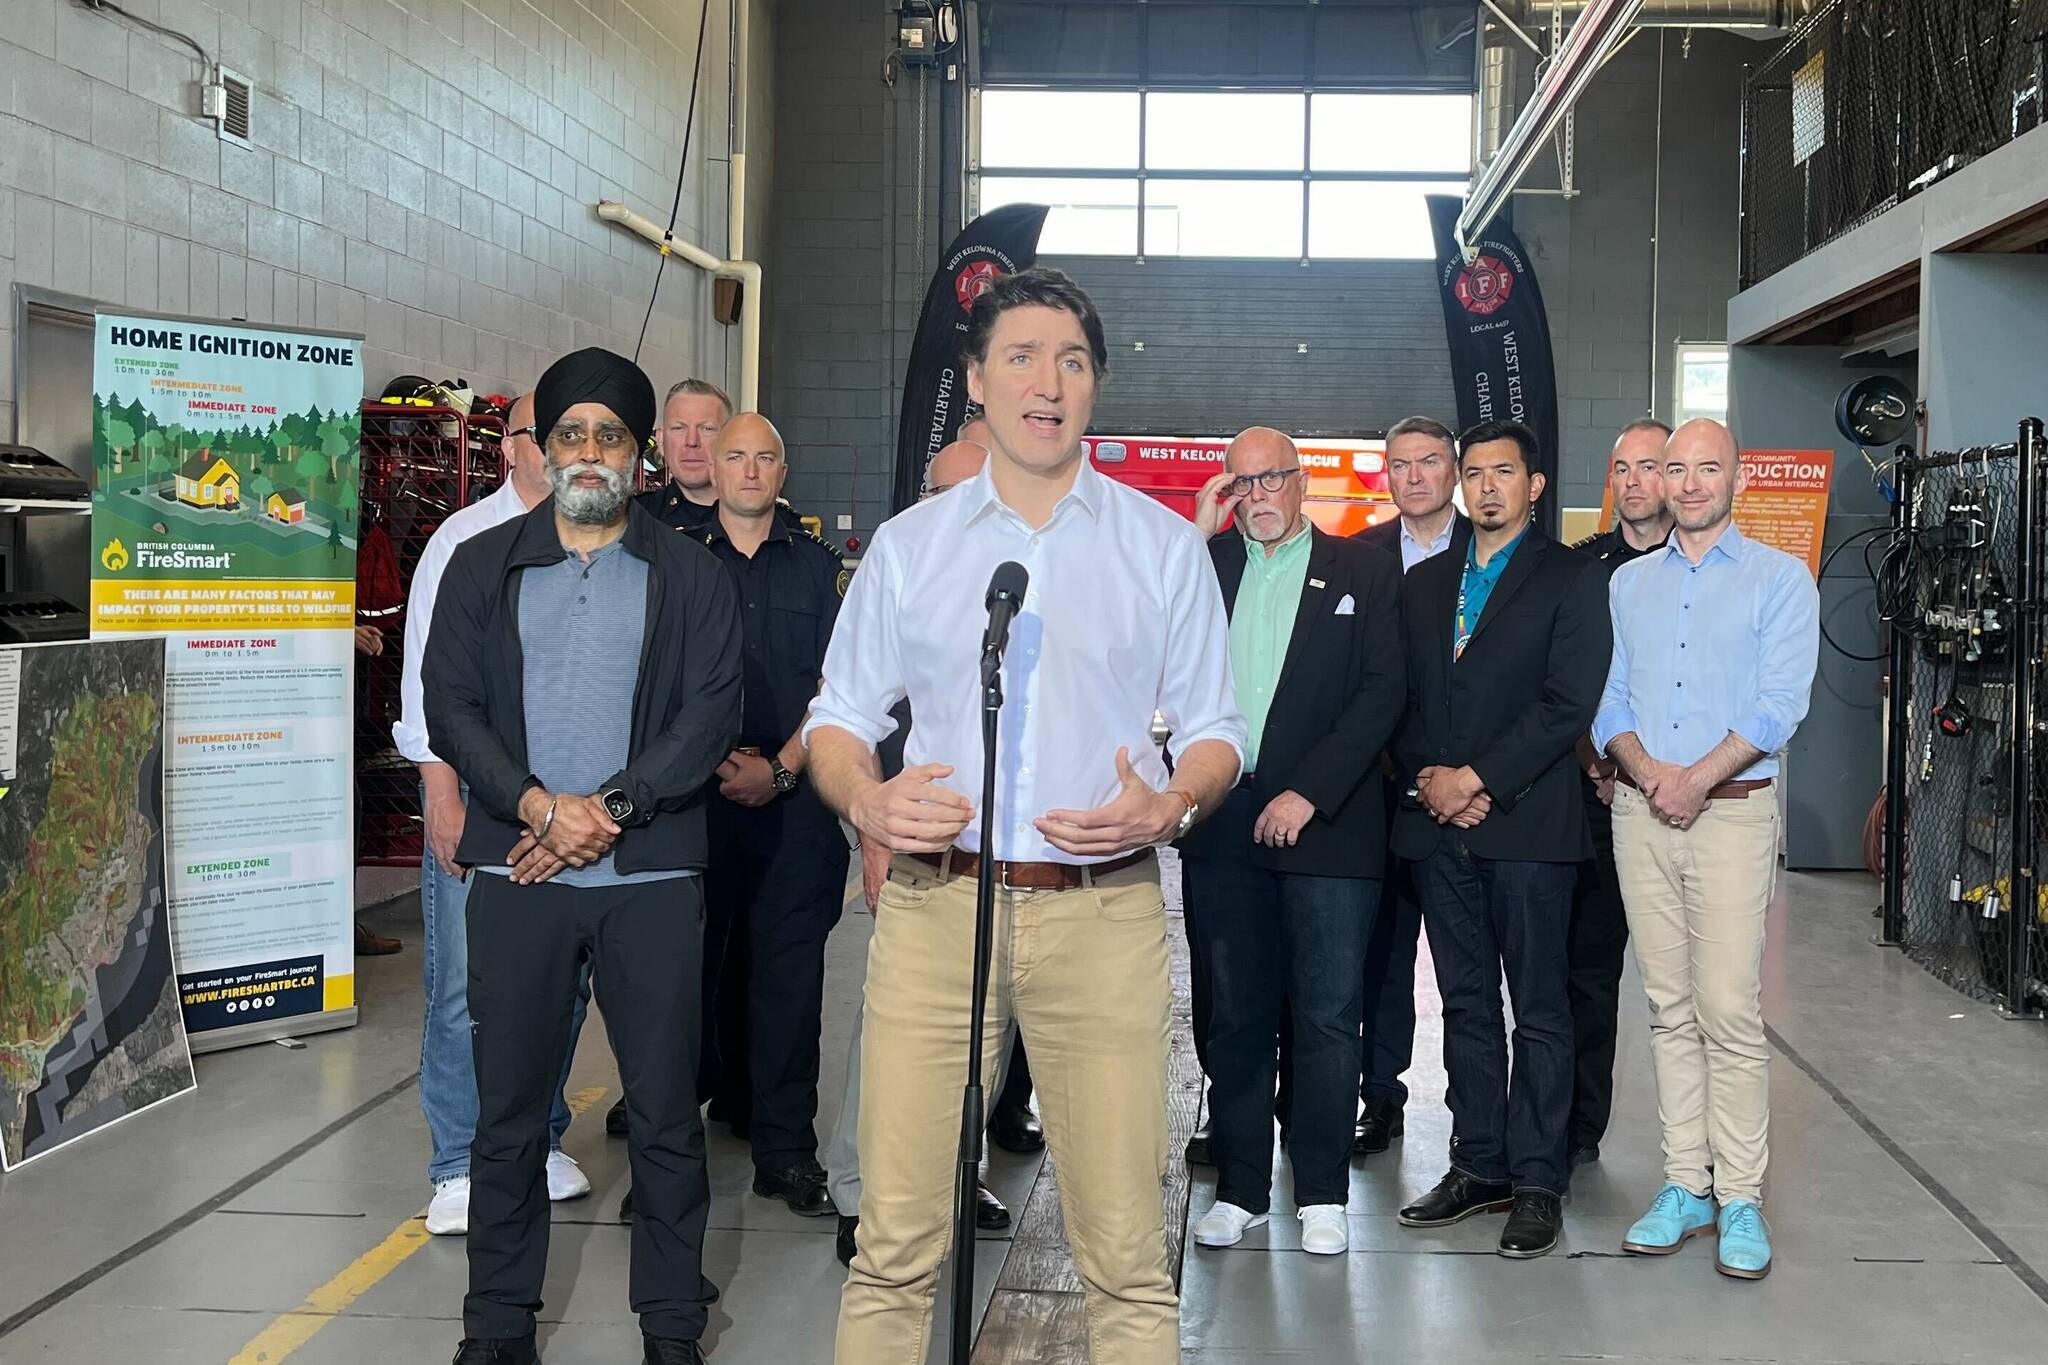 Prime Minister speaks to reporters during a visit to West Kelowna Fire Hall #31 to meet with first responders and elected officials. (Jacqueline Gelineau/Capital News)